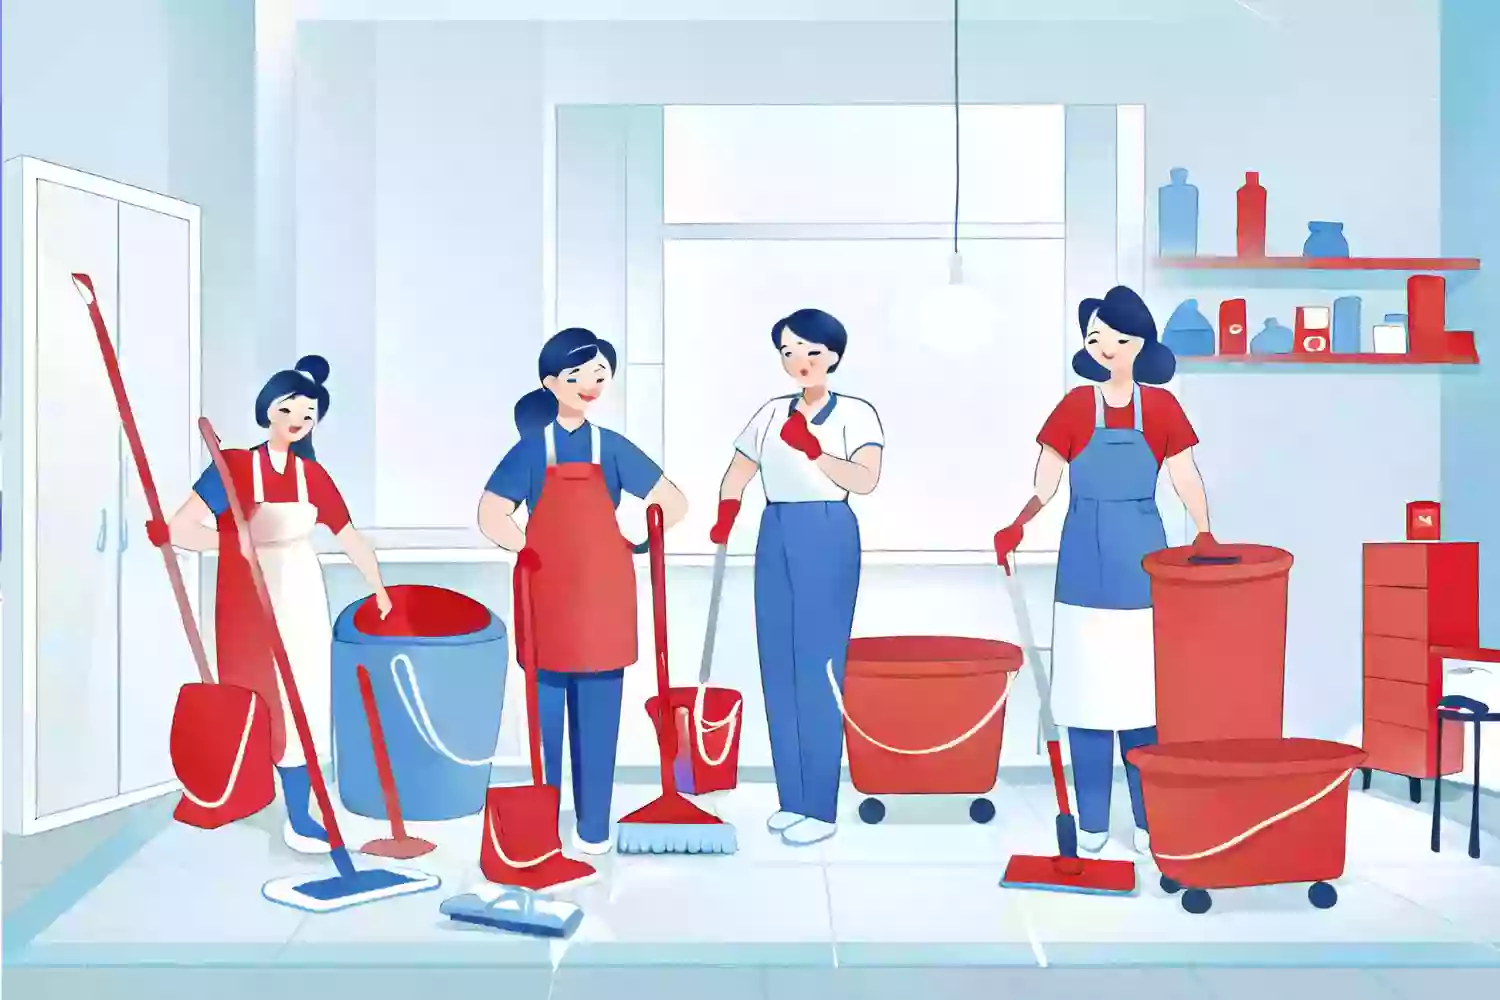 Mima's Cleaning Company